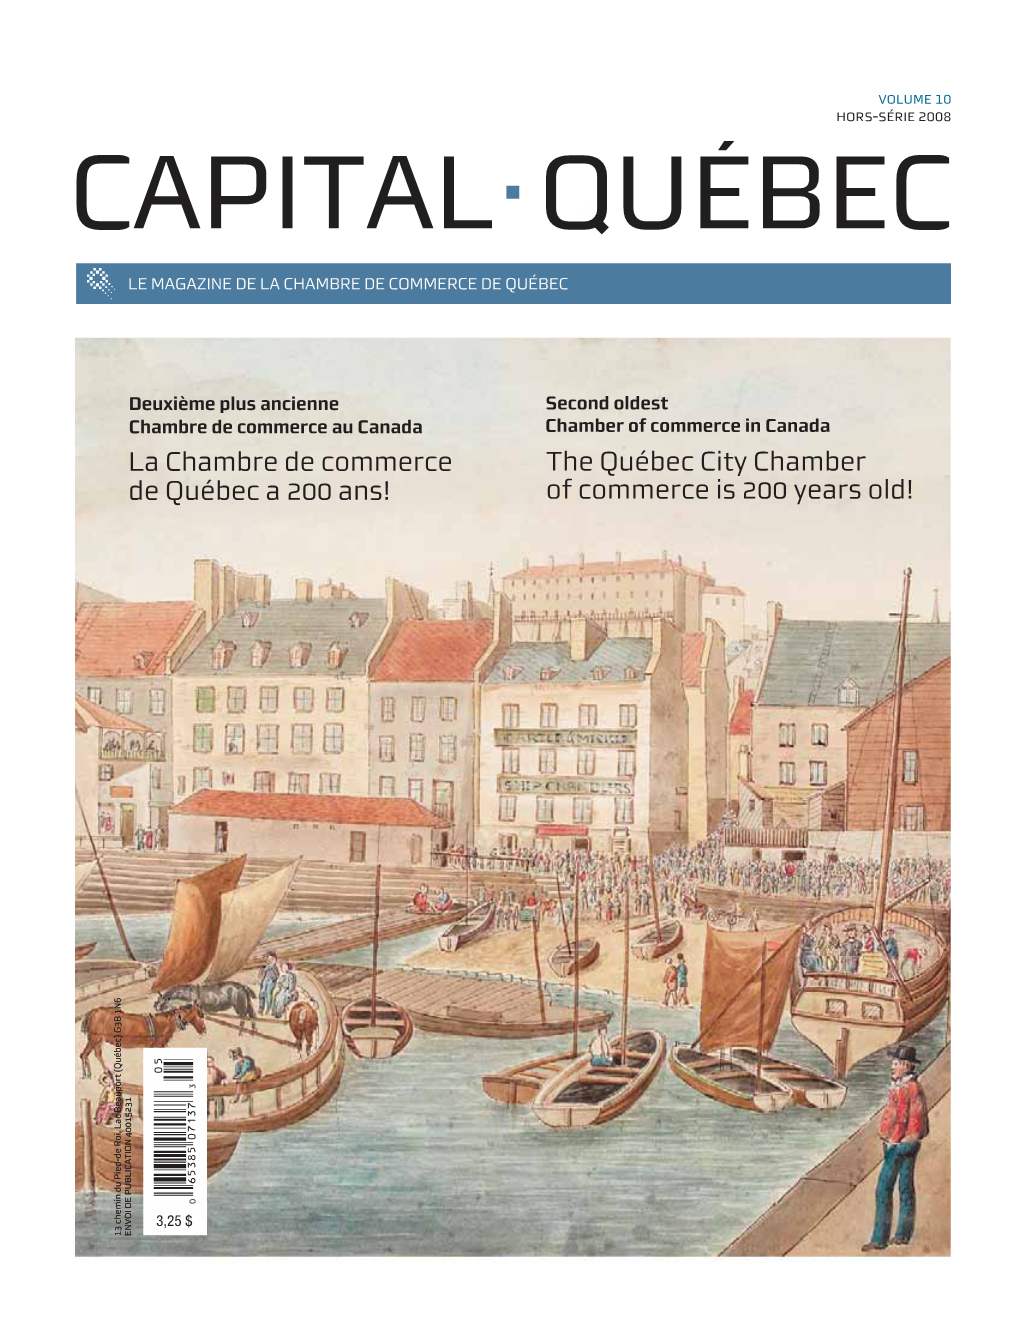 The Québec City Chamber of Commerce Is 200 Years Old!